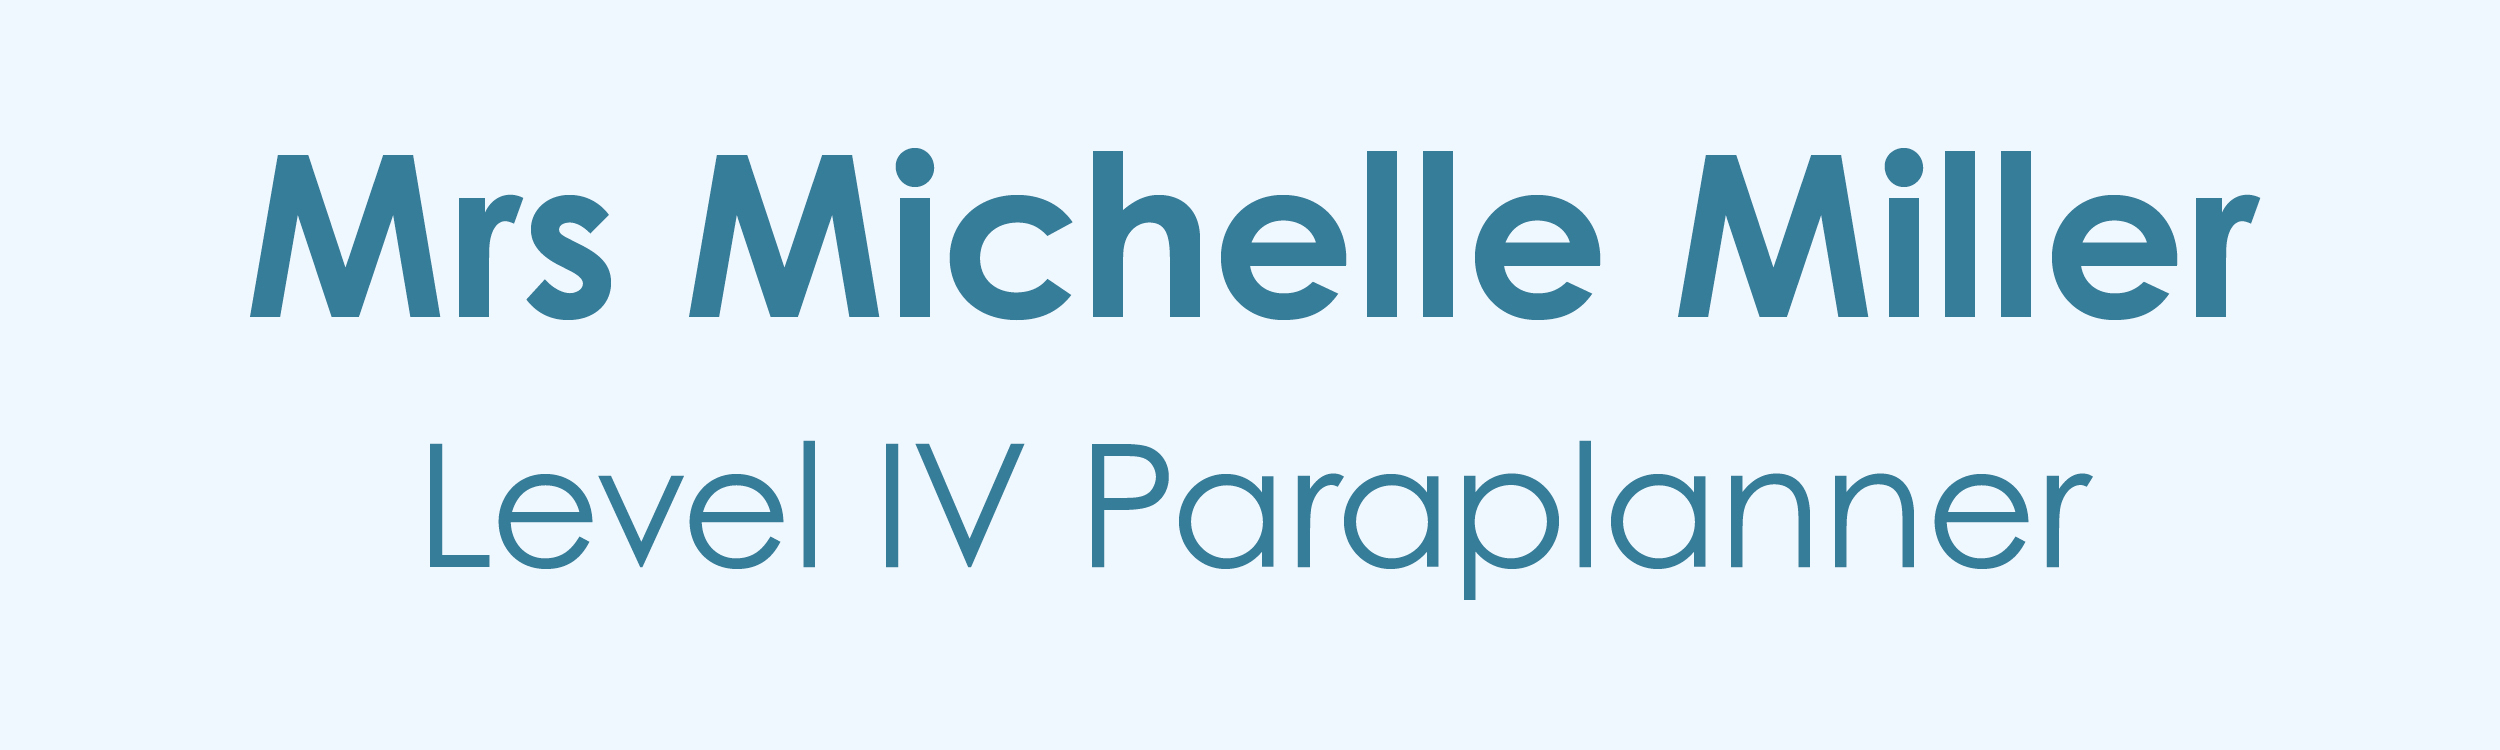 A title plaque for the picture of Mrs Michelle Miller, Paraplanner.